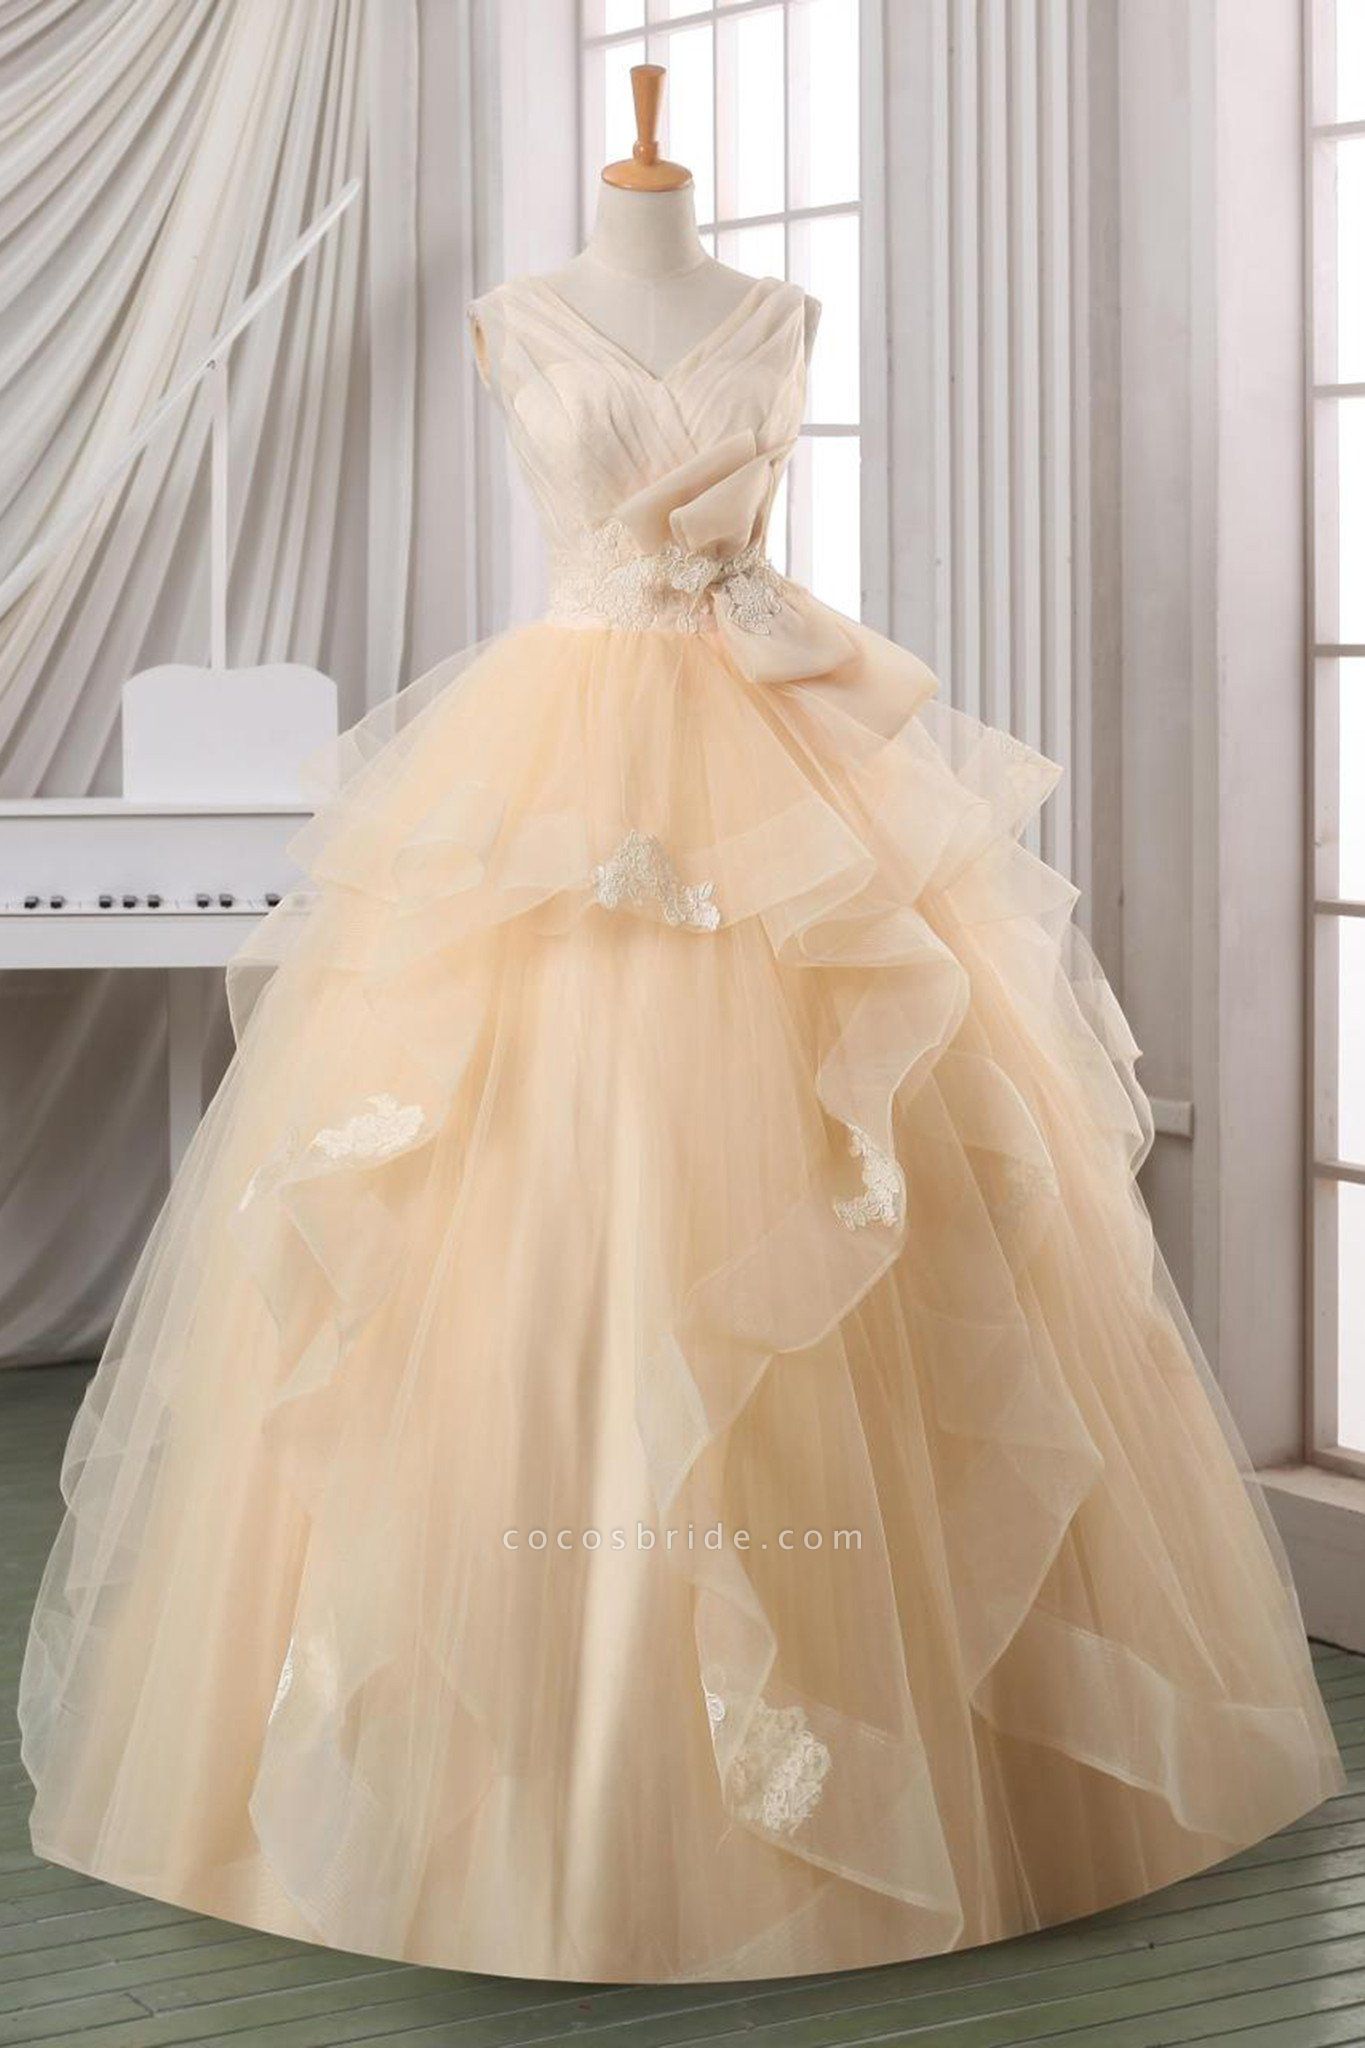 Layering V-Neck Applique Bowknot A-Line Ball Gown Wedding Dresses